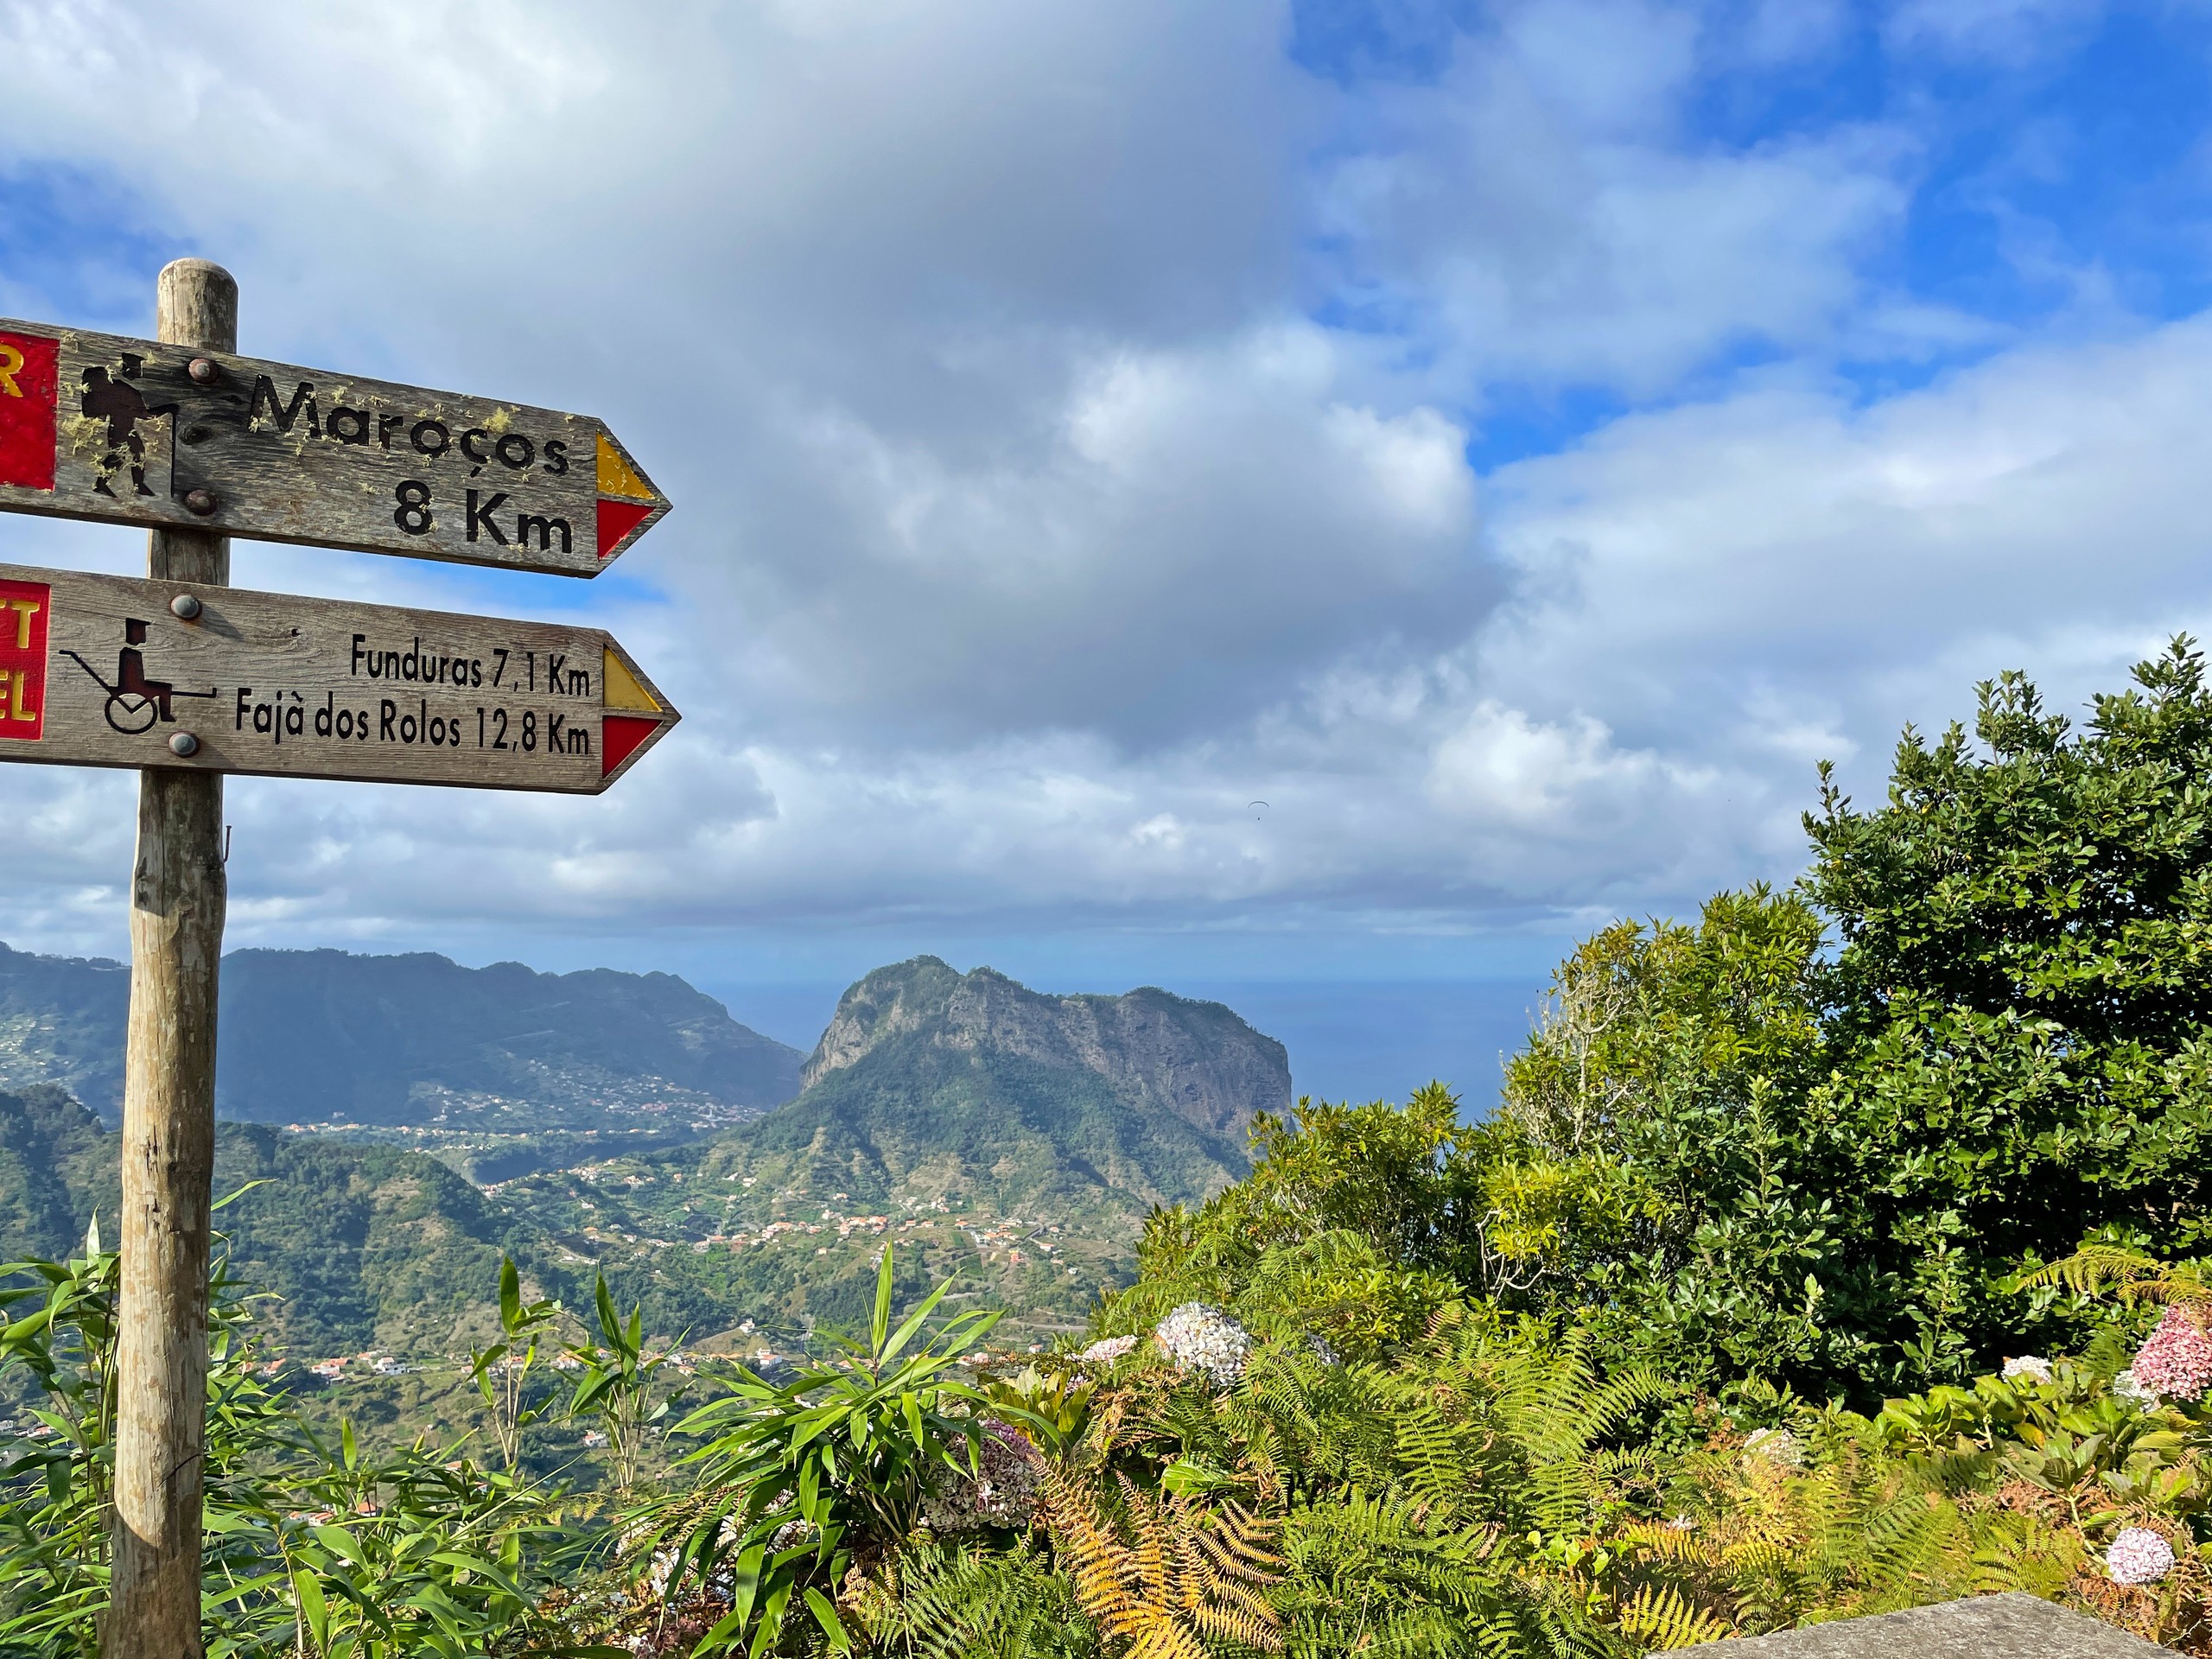 Waypoints along the walking route in Madeira